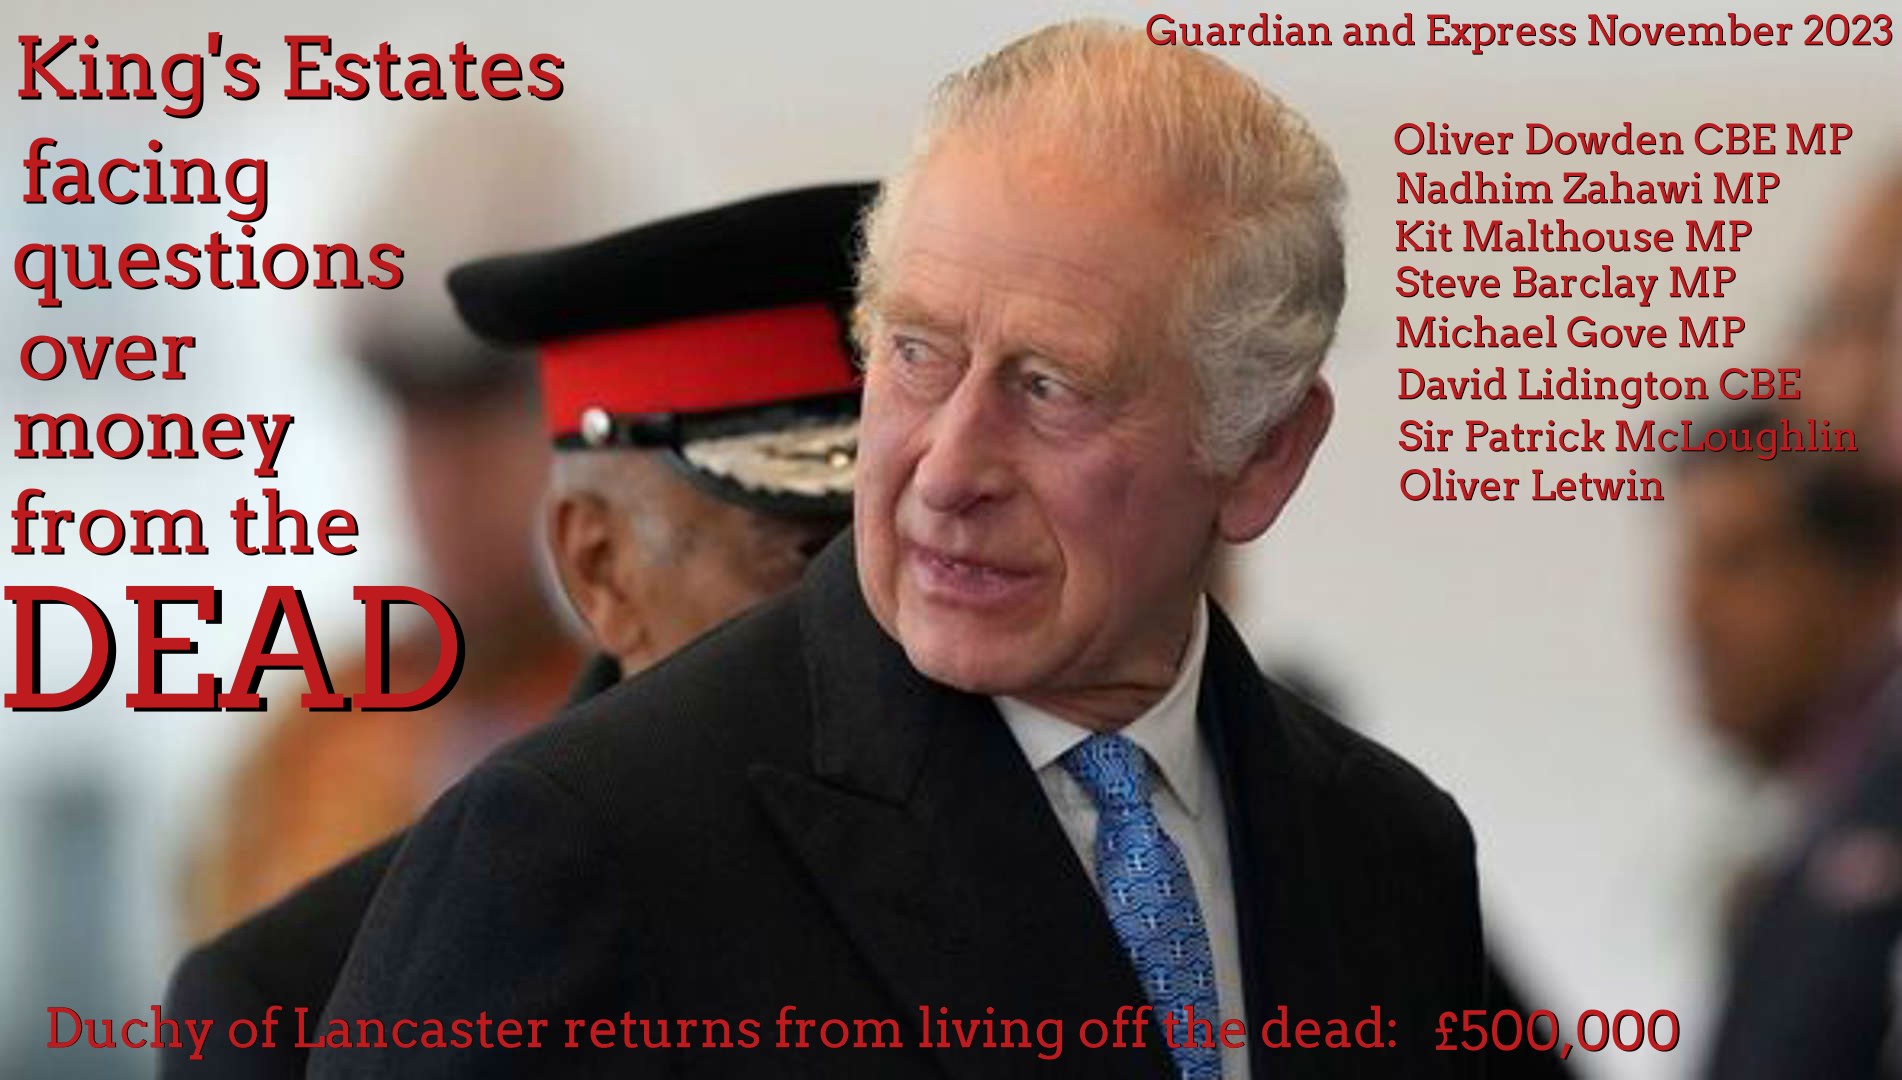 The King's Estates are facing questions over receiving money from the dead, according to articles in the Guardian and Exrpress newspapers in Novmeber 2023